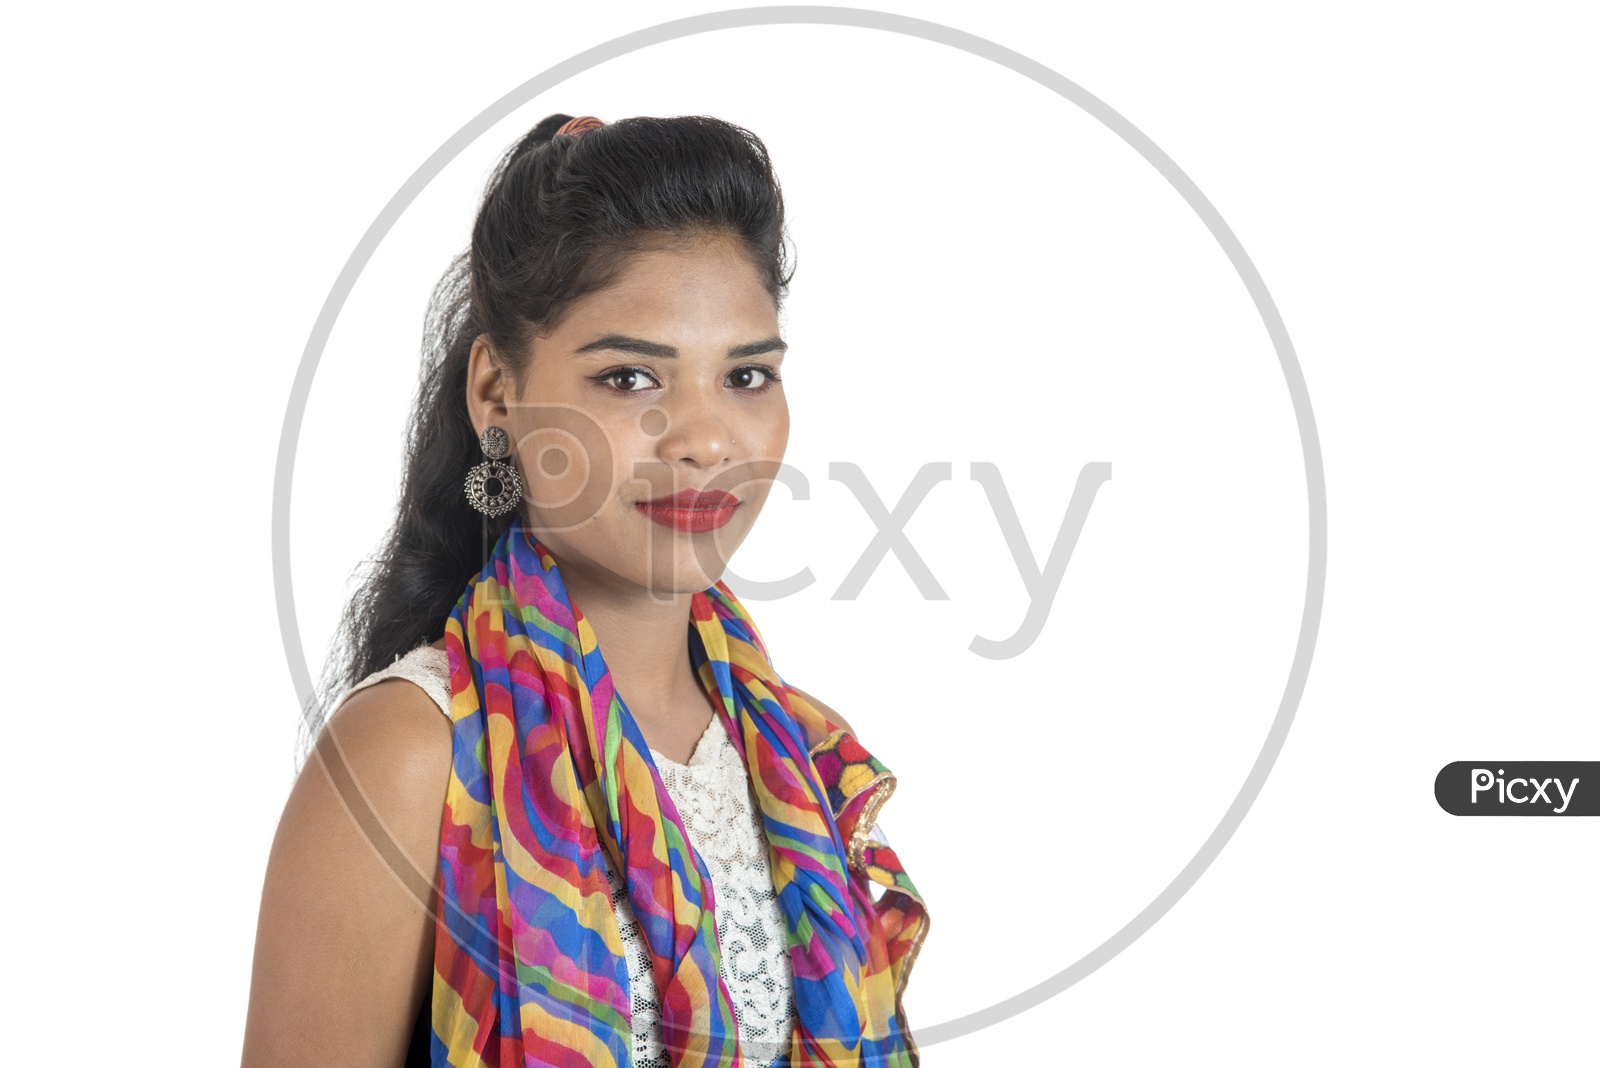 A Happy Young Indian Girl With Smiling Face Over a White Background